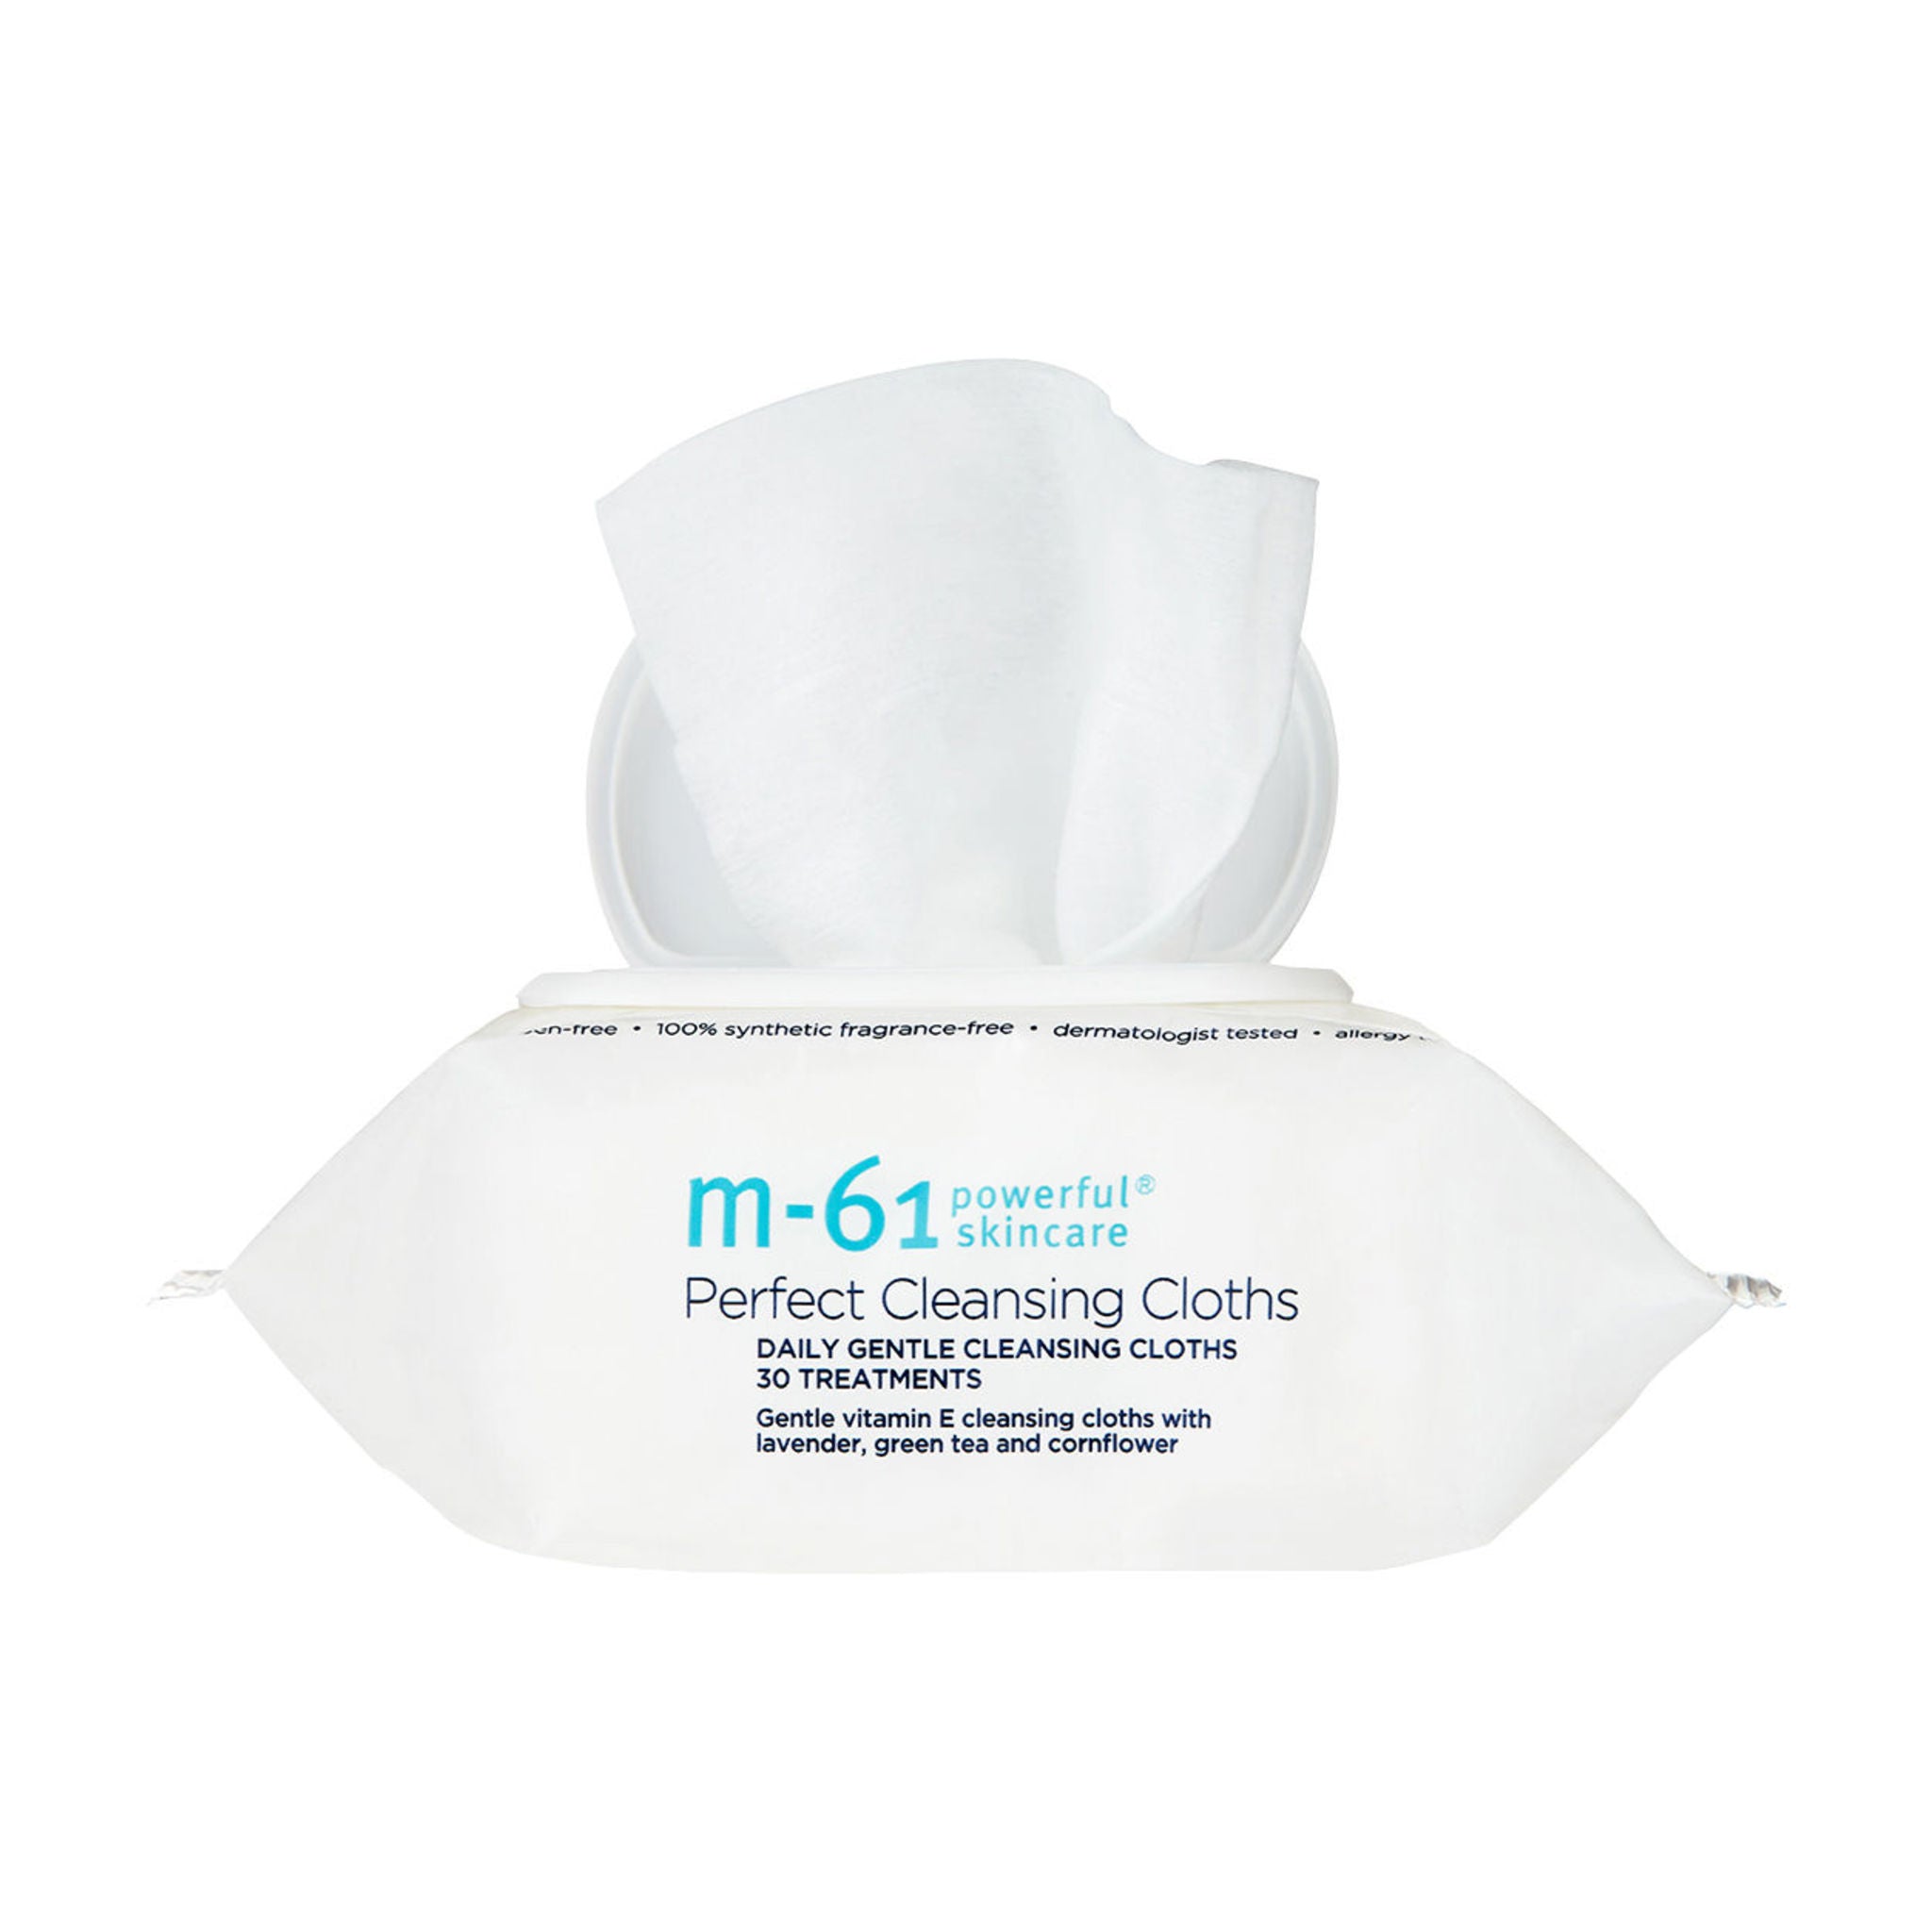 M-61 Perfect Cleansing Cloths Size variant: 30 treatments main image.